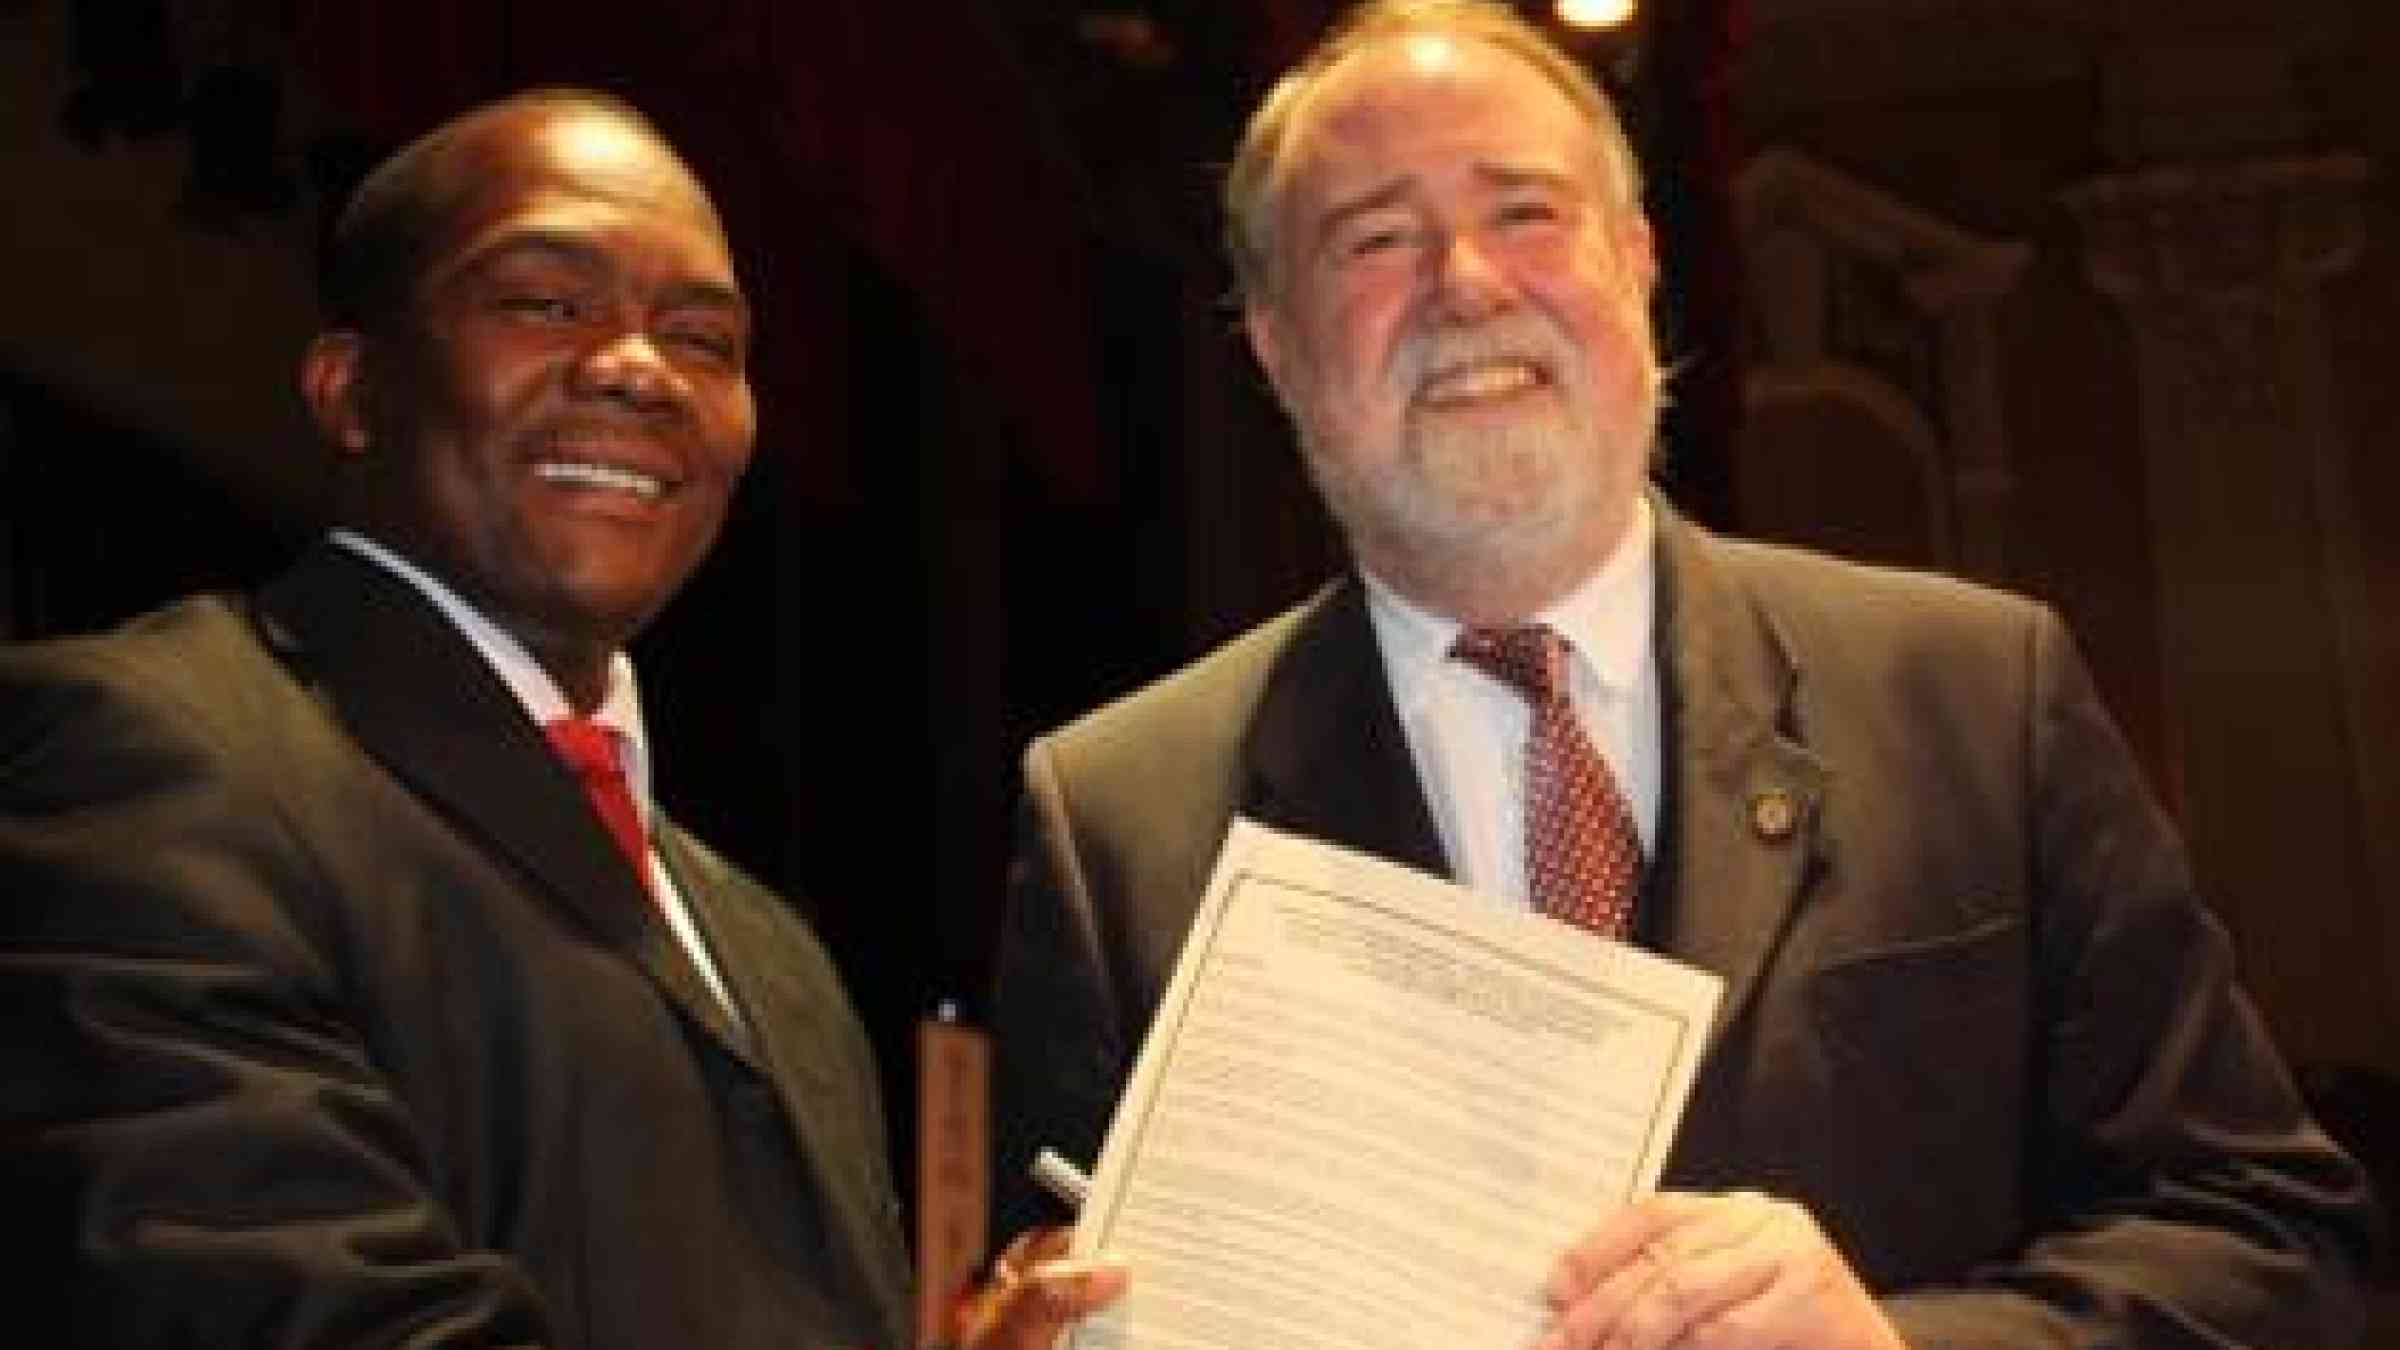 From left: Durban Mayor James Nxumalo and ICLEI President David Cadman with a signed Durban Climate Change Adaptation Charter